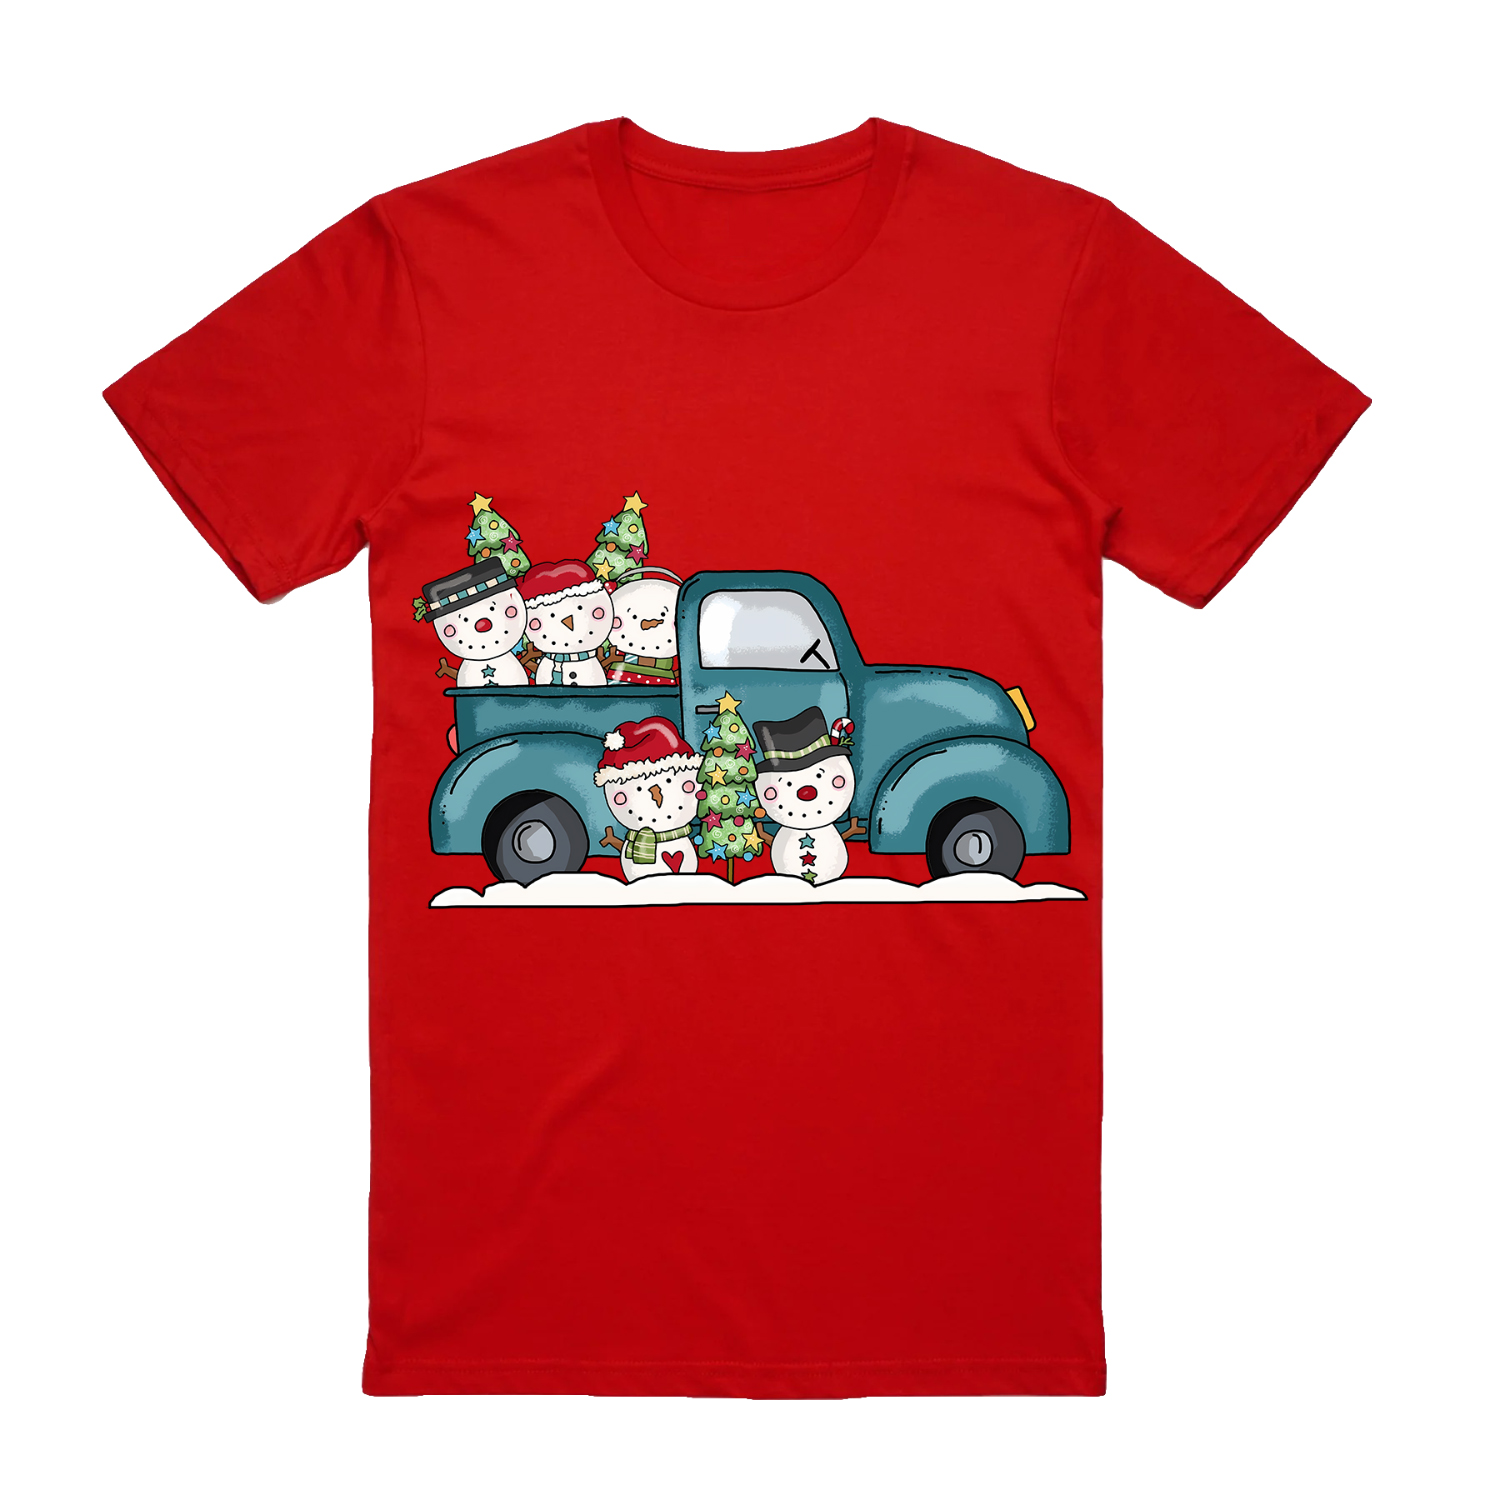 100% Cotton Christmas T-shirt Adult Unisex Tee Tops - Car with Snowman